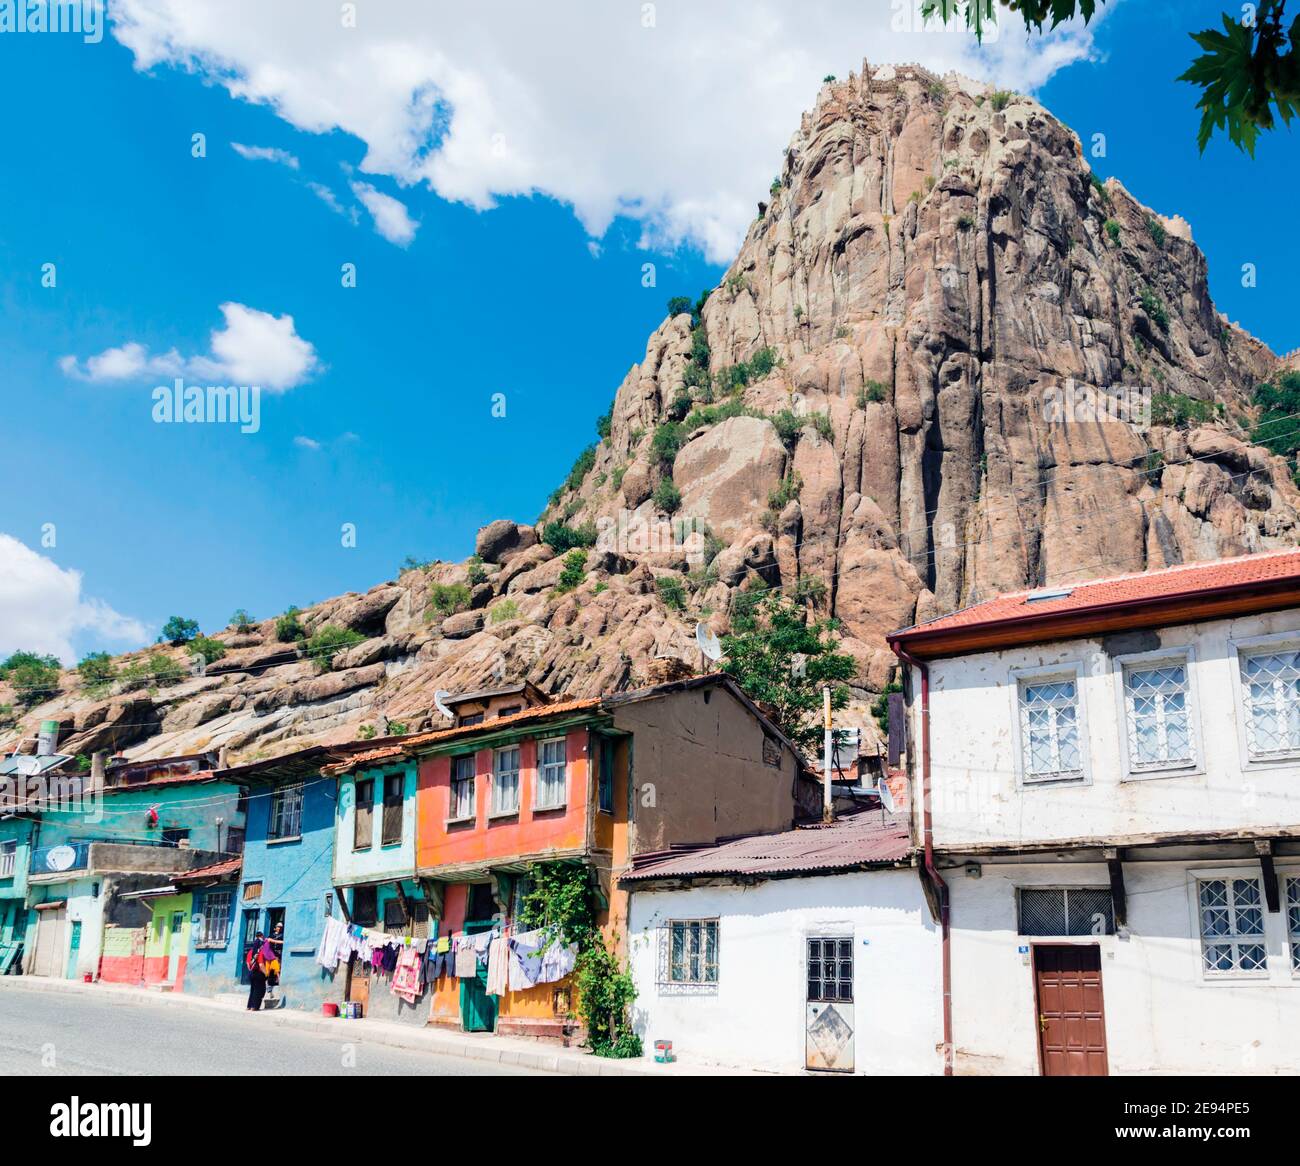 Afyon, also known as Afyon Kara Hisar or Afyonkarahisar, Afyon Province, Turkey.  Typical houses beneath the crag which is over 200 metres high and ha Stock Photo